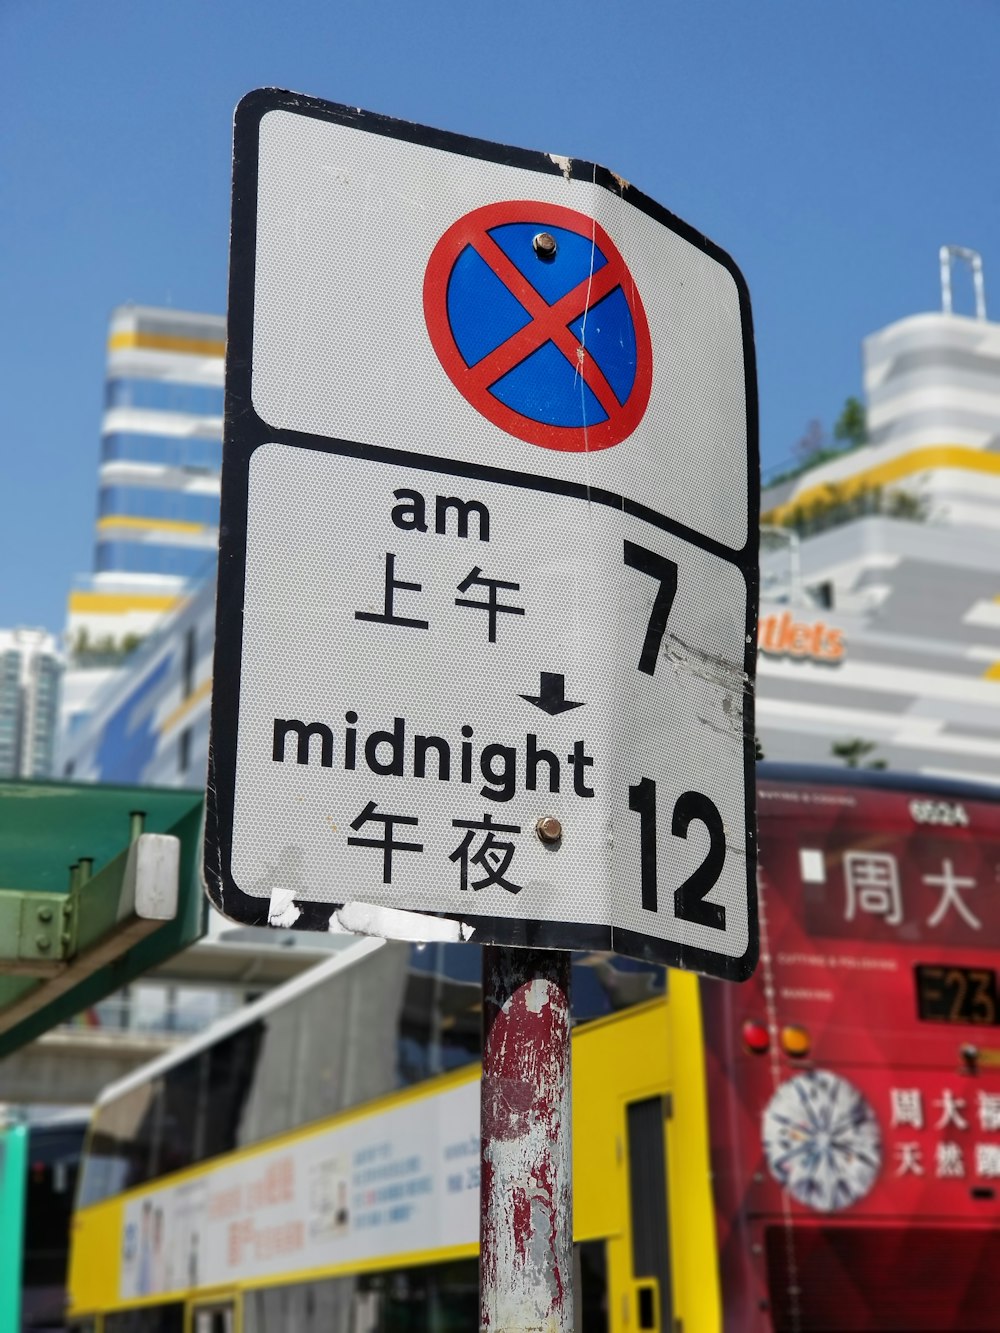 am 7 and midnight 12 road sign